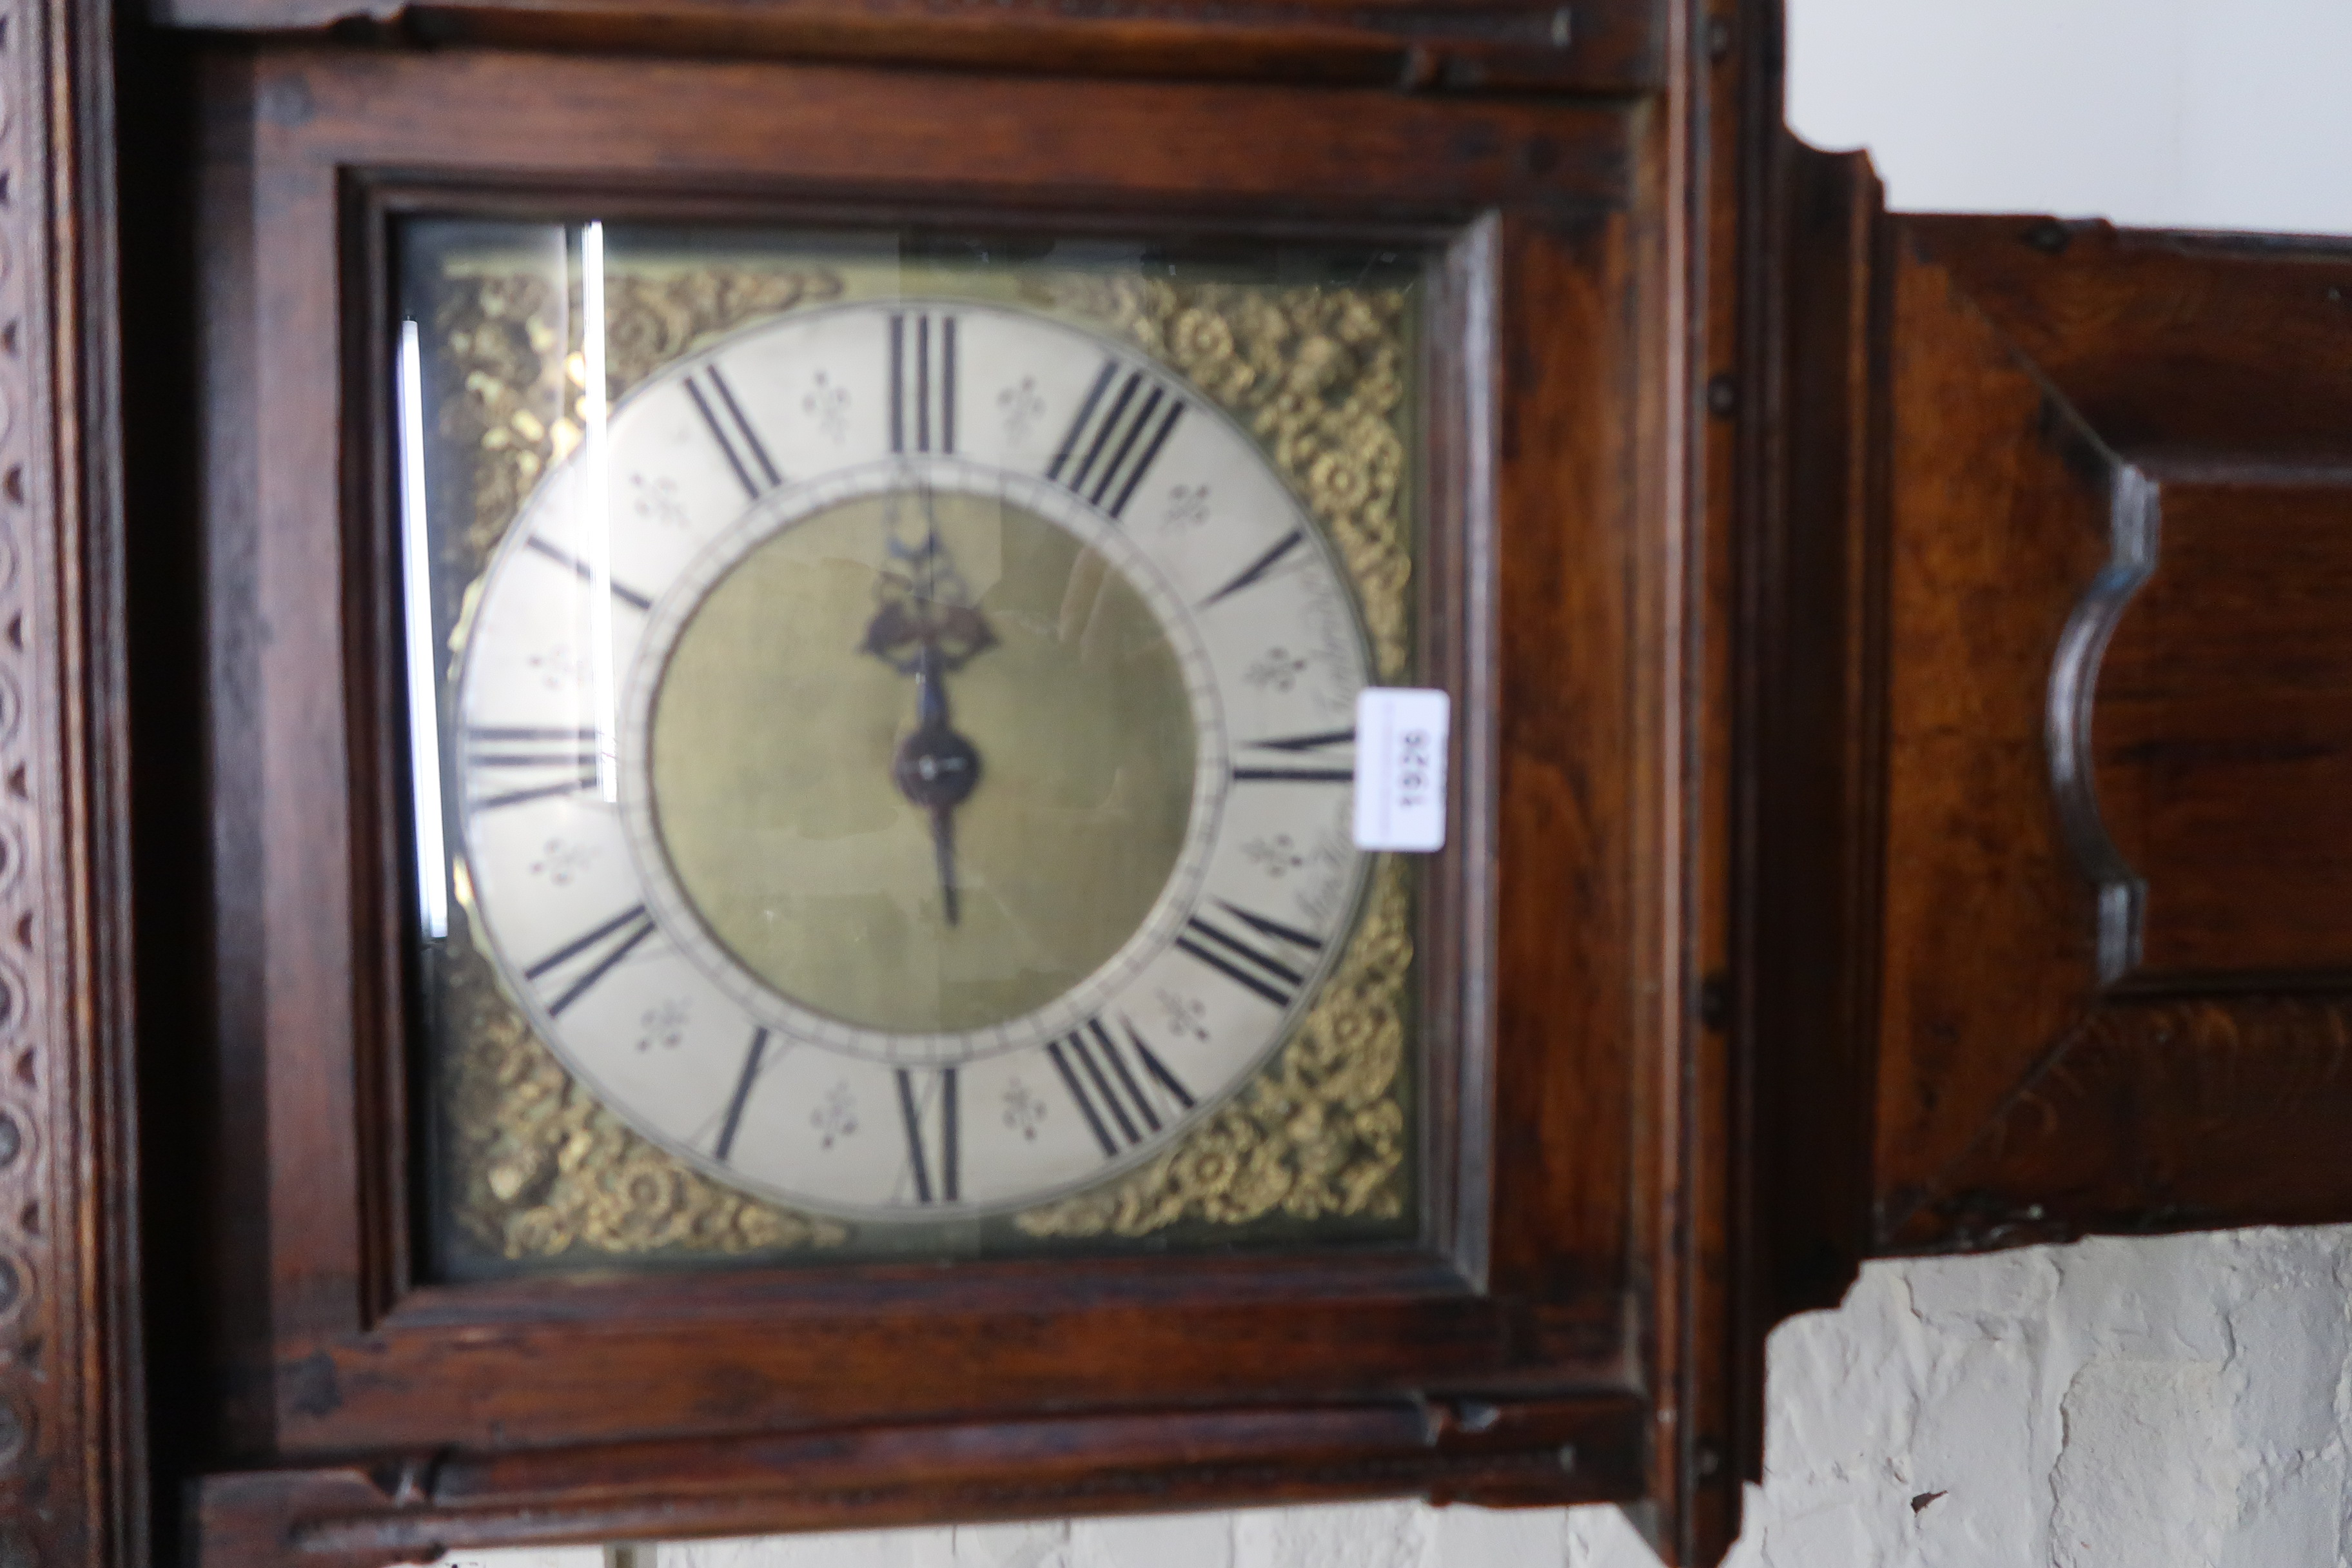 18th Century oak longcase clock with brass dial , silvered chapter ring and Roman numerals, signed